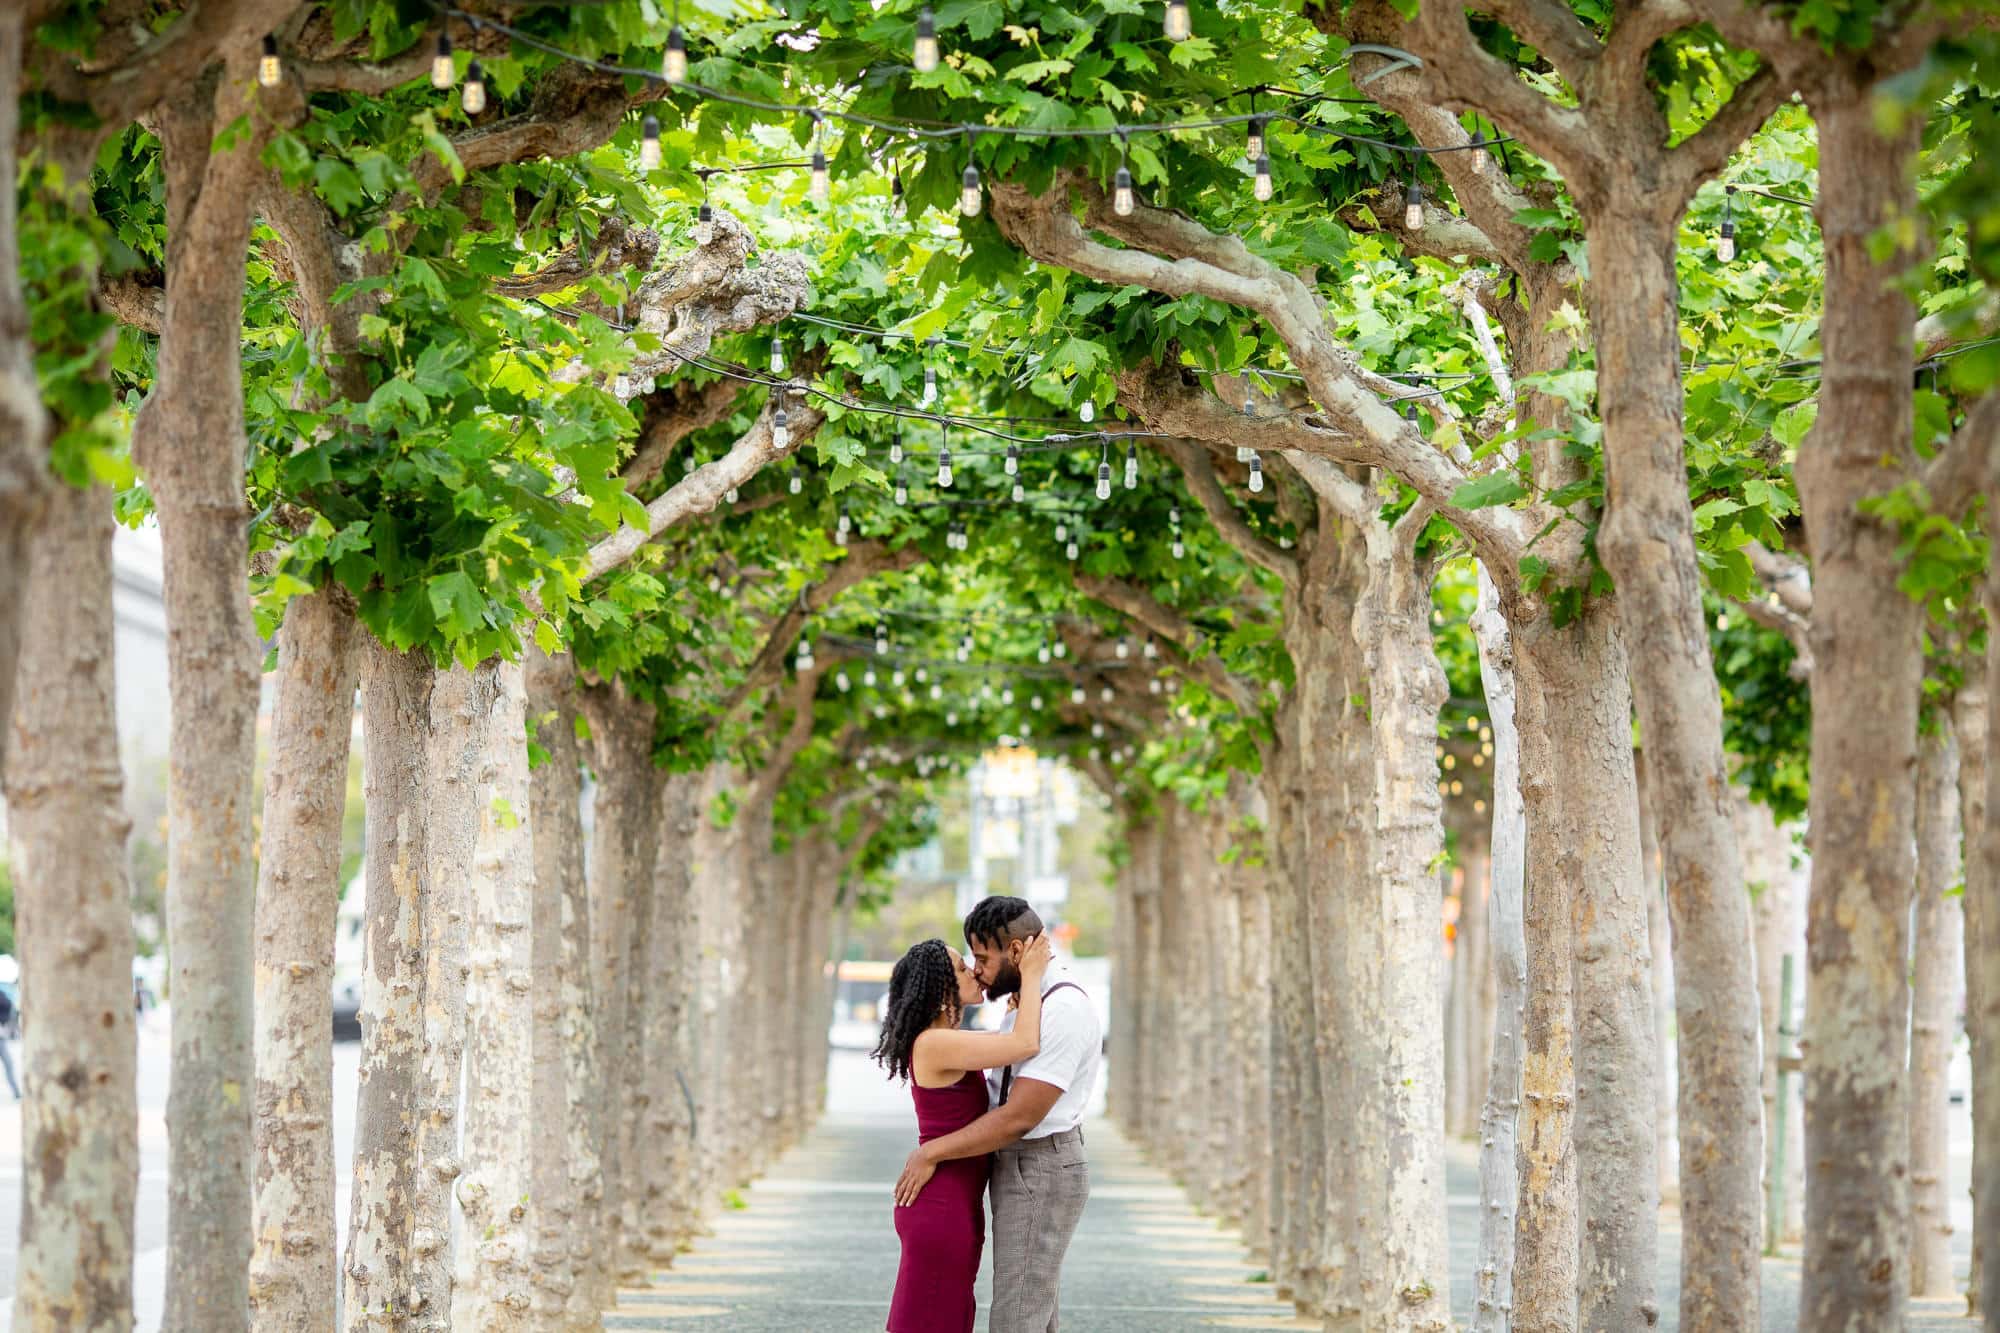 Man and woman hugging outside in between two rows of trees